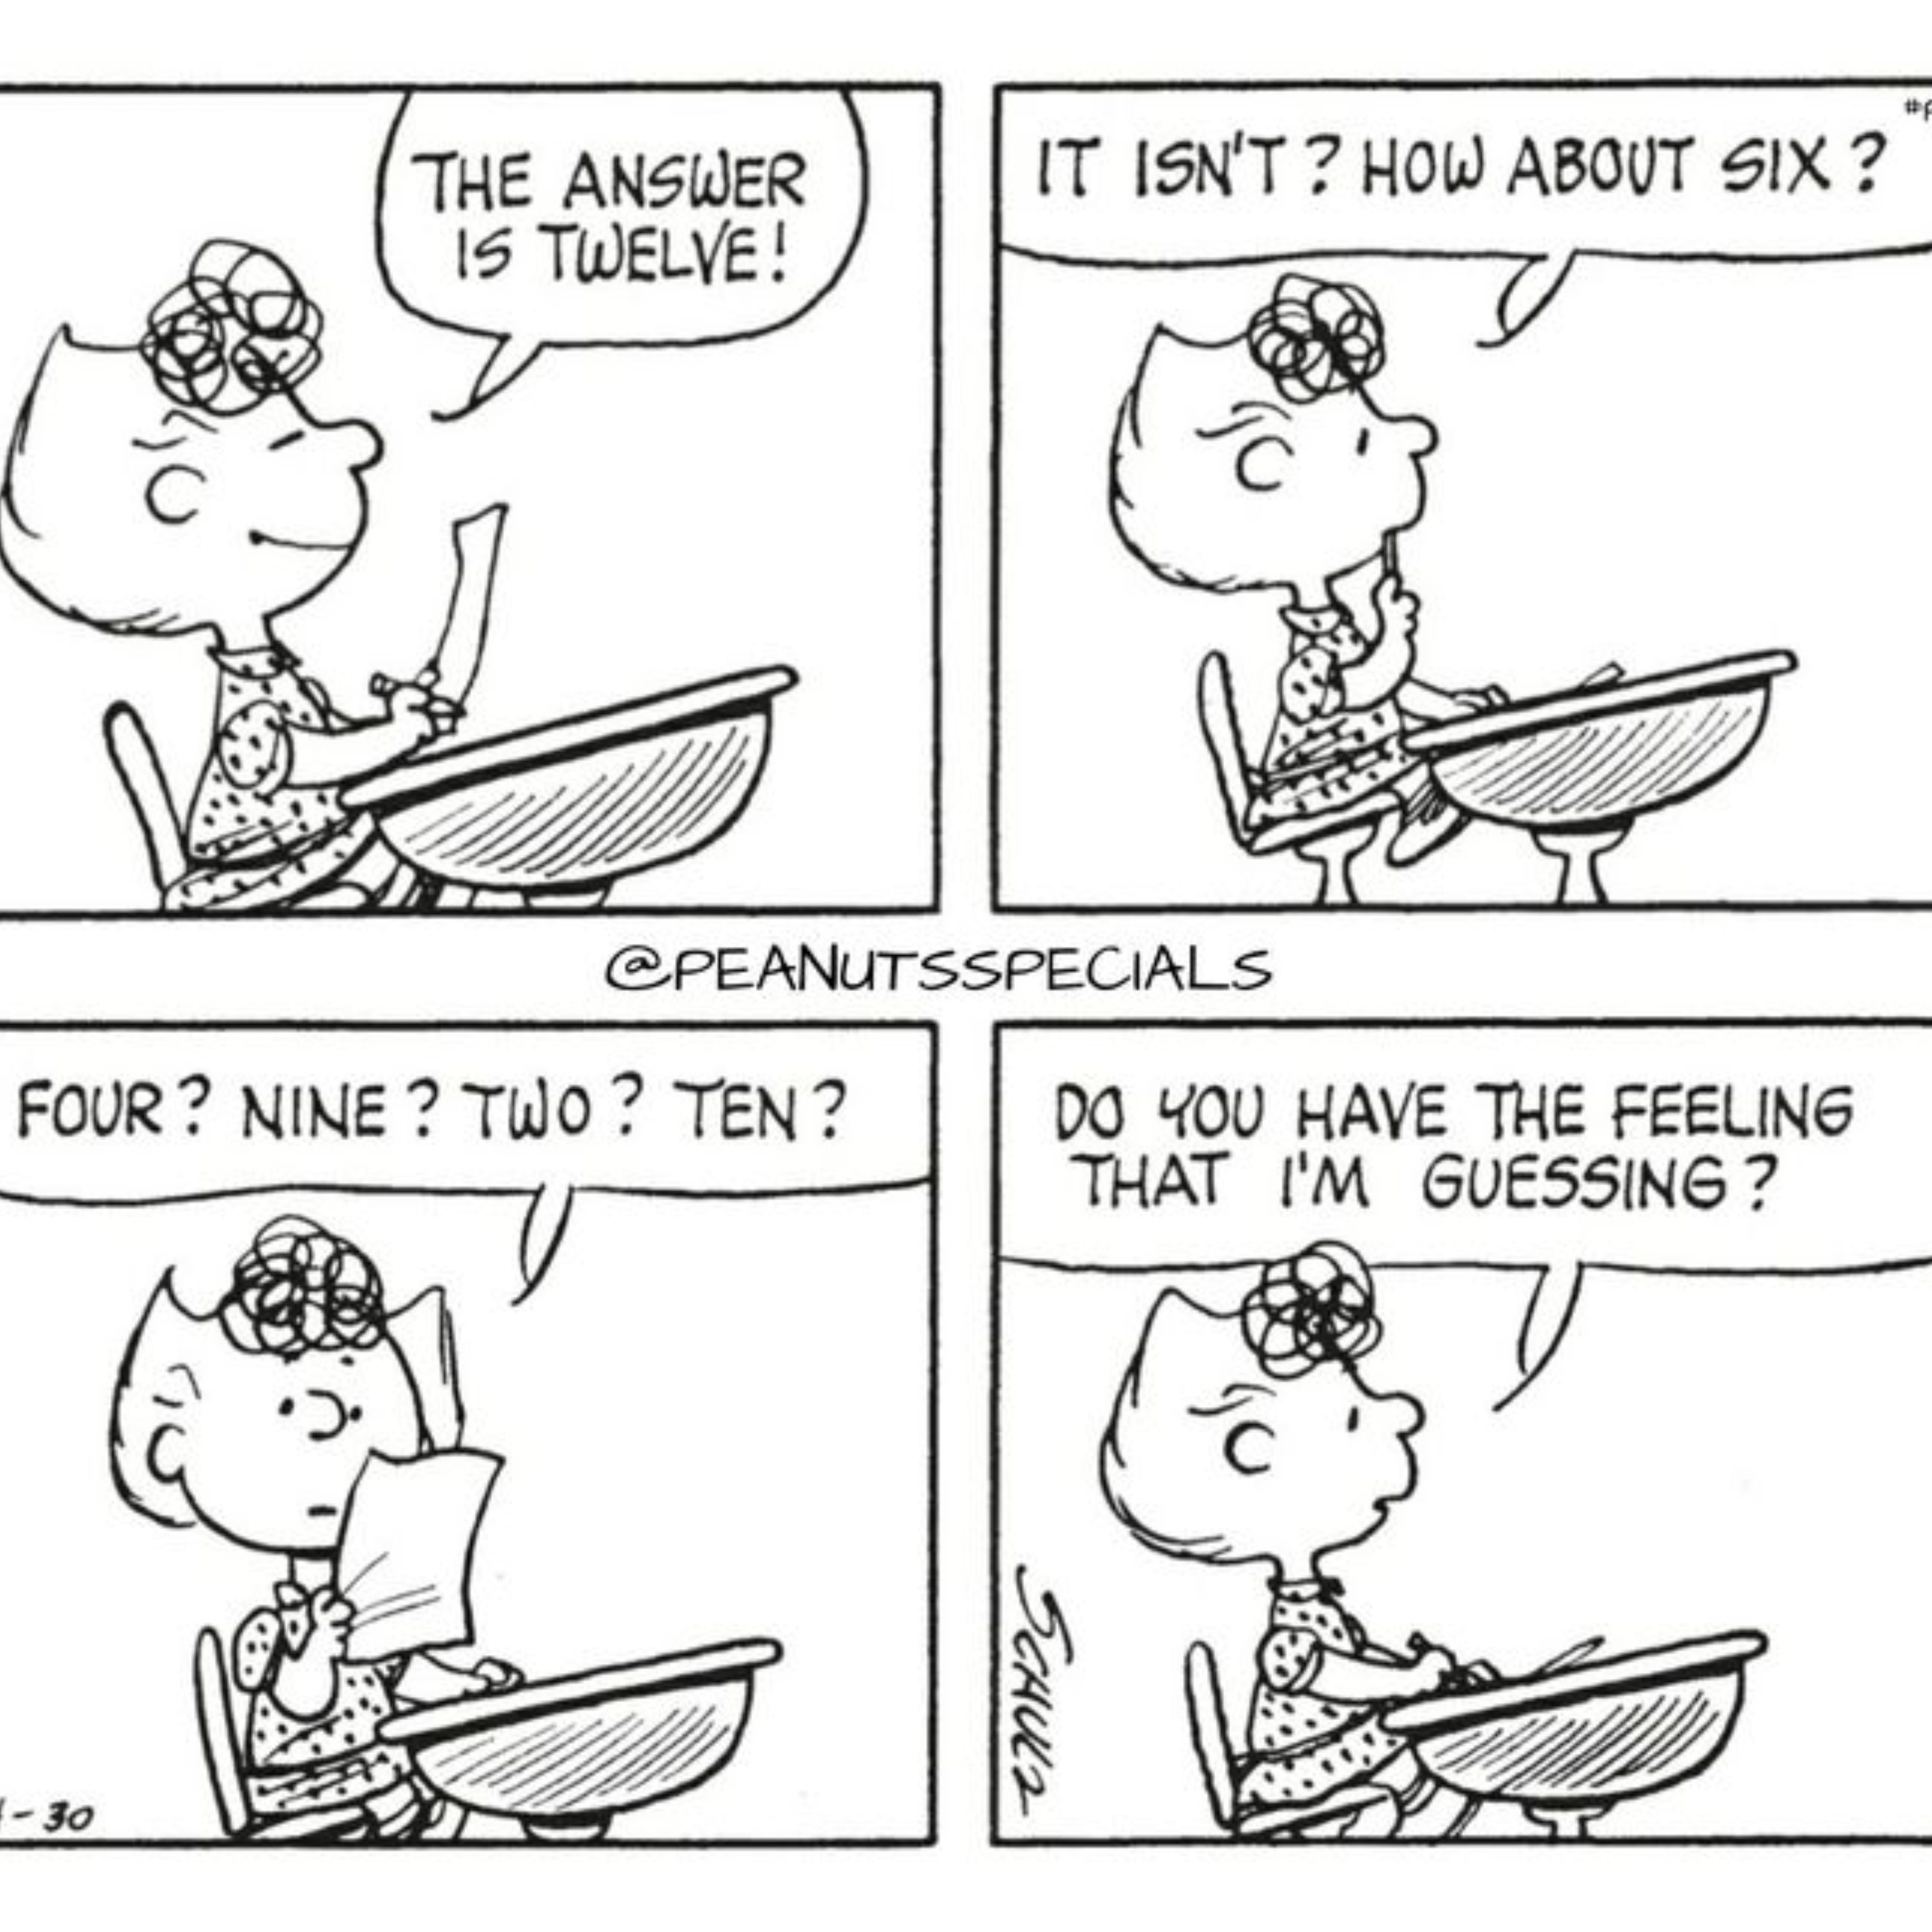 Sally sitting at a desk in Peanuts.